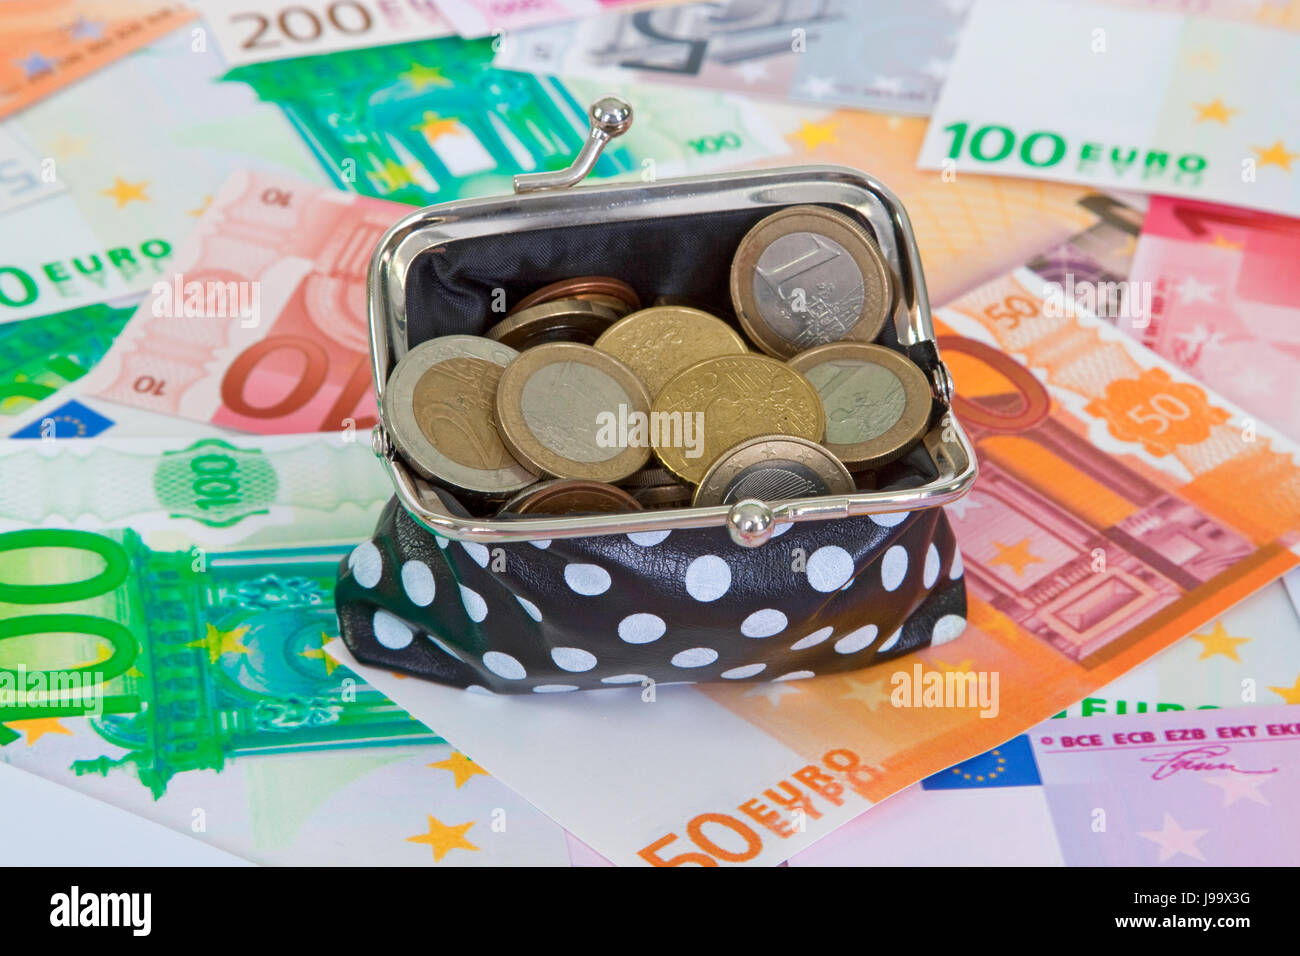 Purse with euro banknotes as background Stock Photo